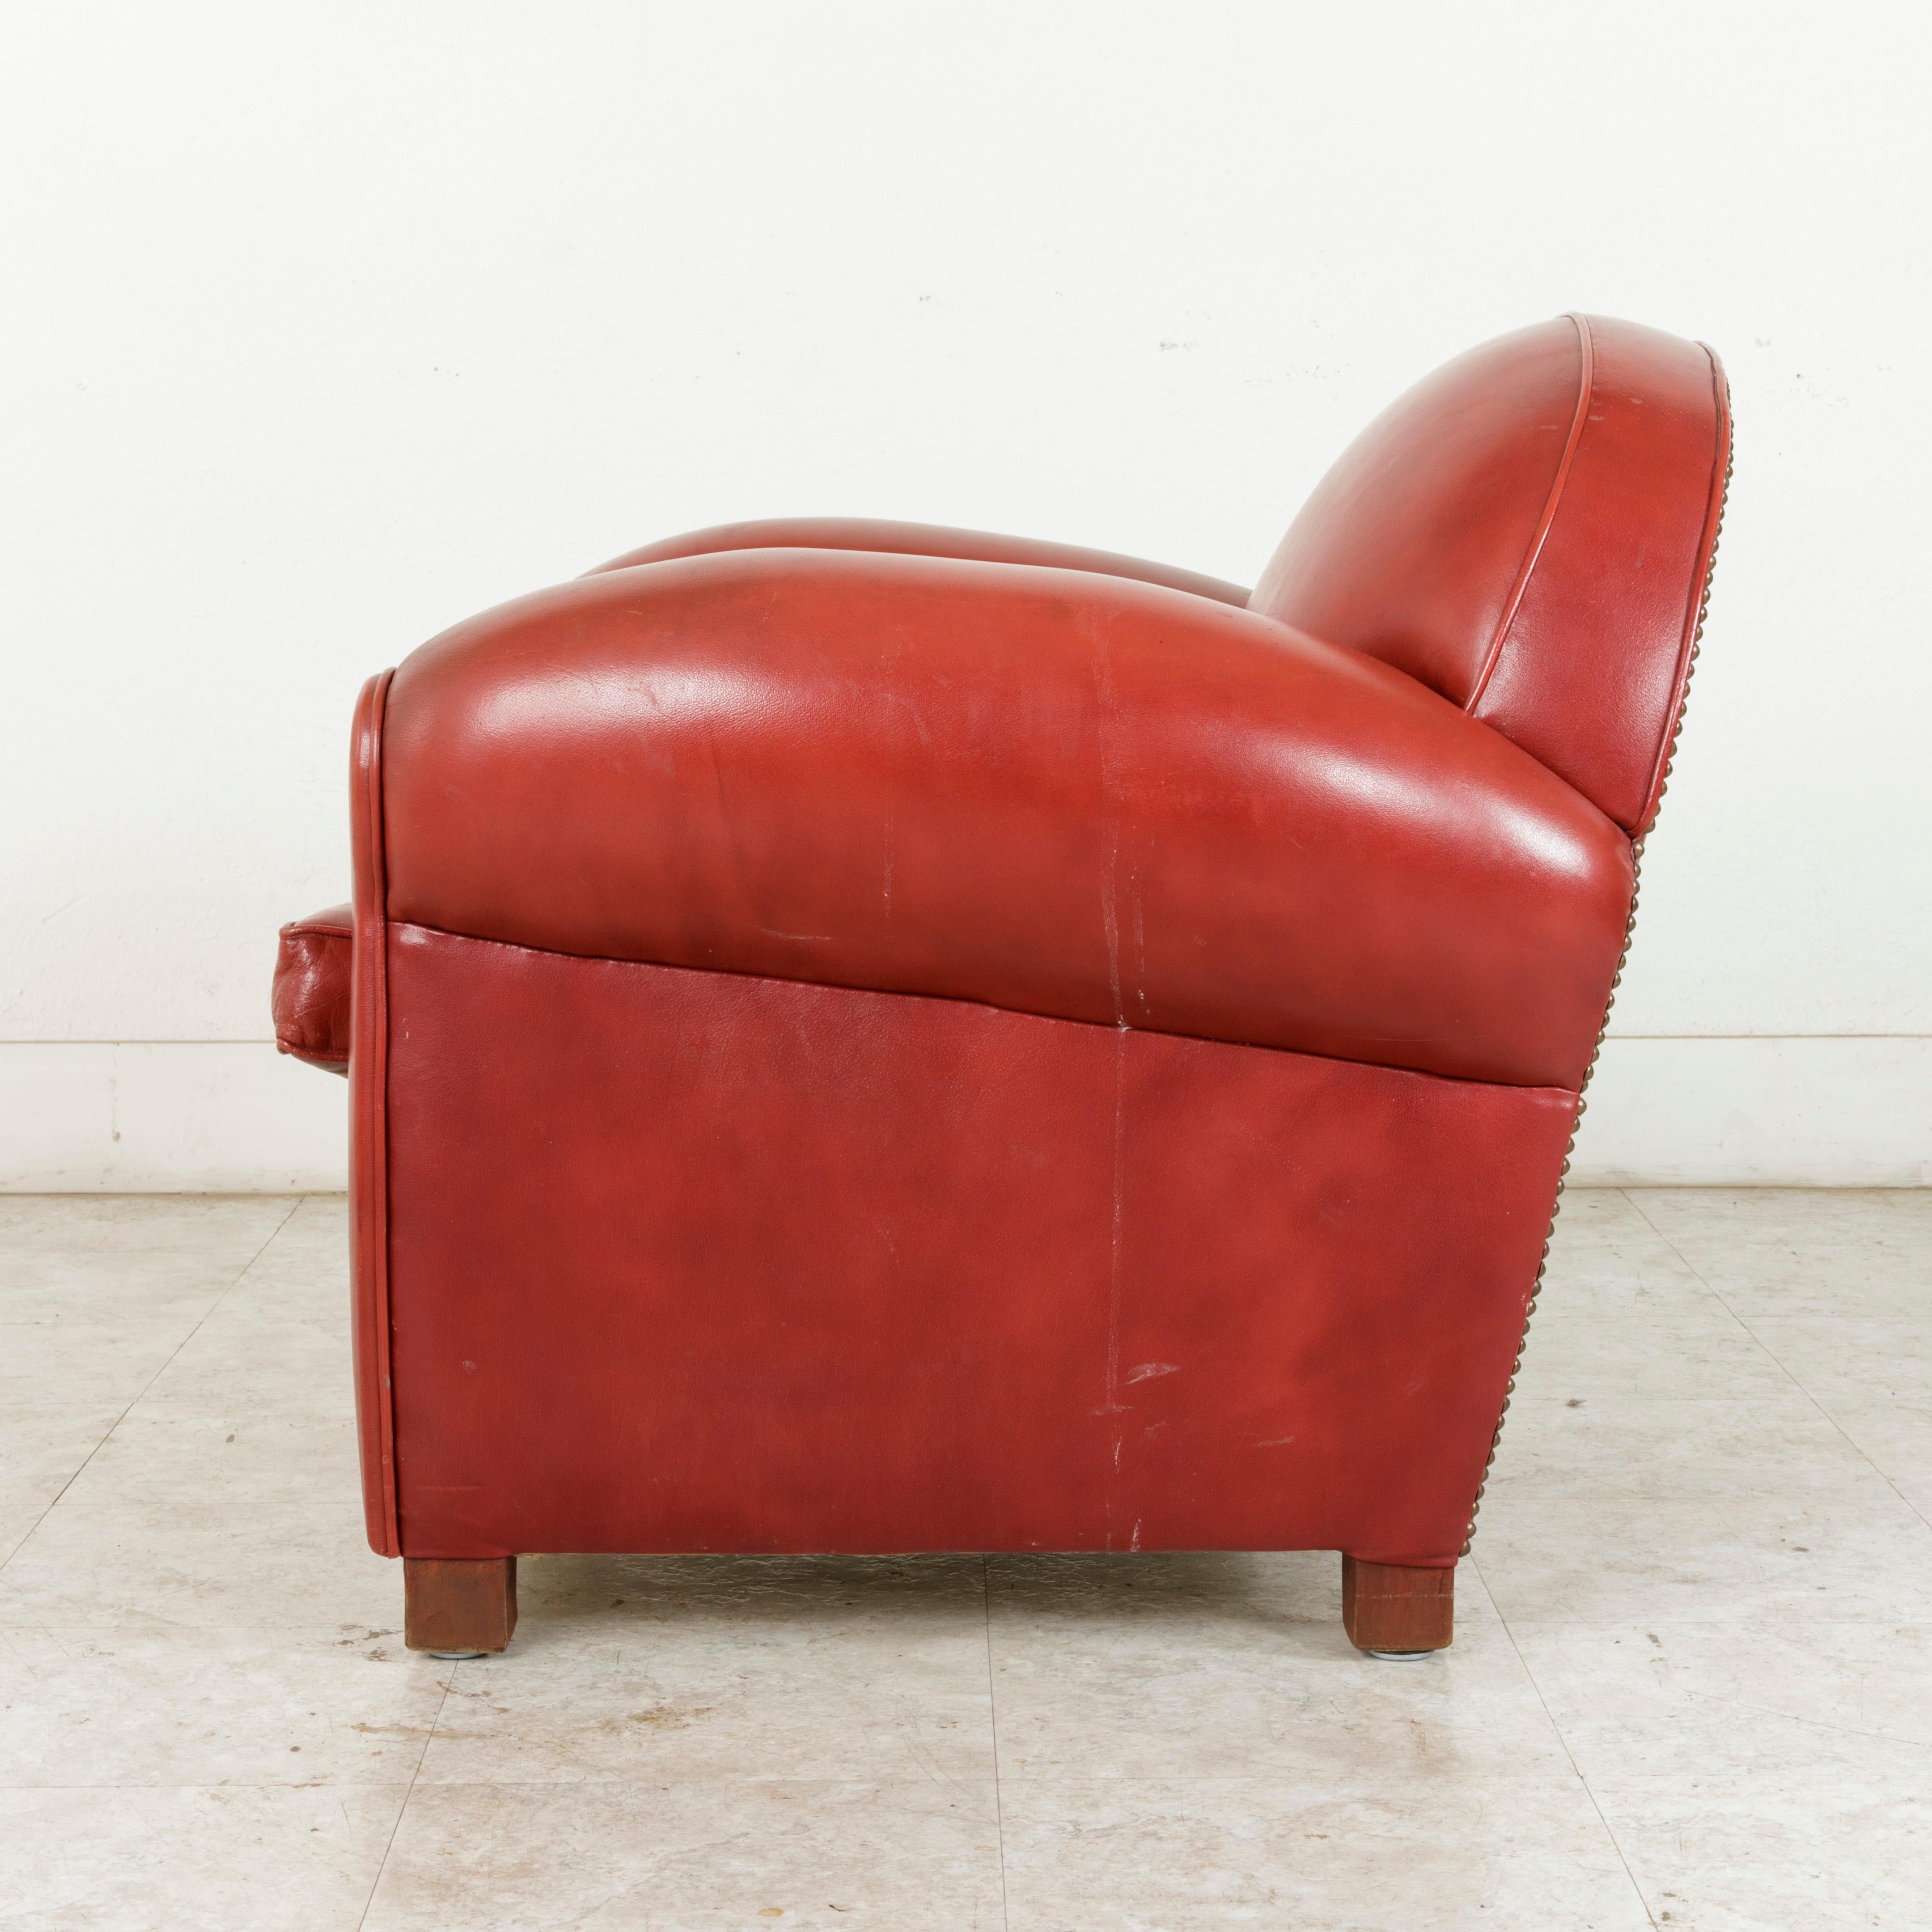 Midcentury French Art Deco Red Leather Club Chair or Lounge Chair, circa 1950 1